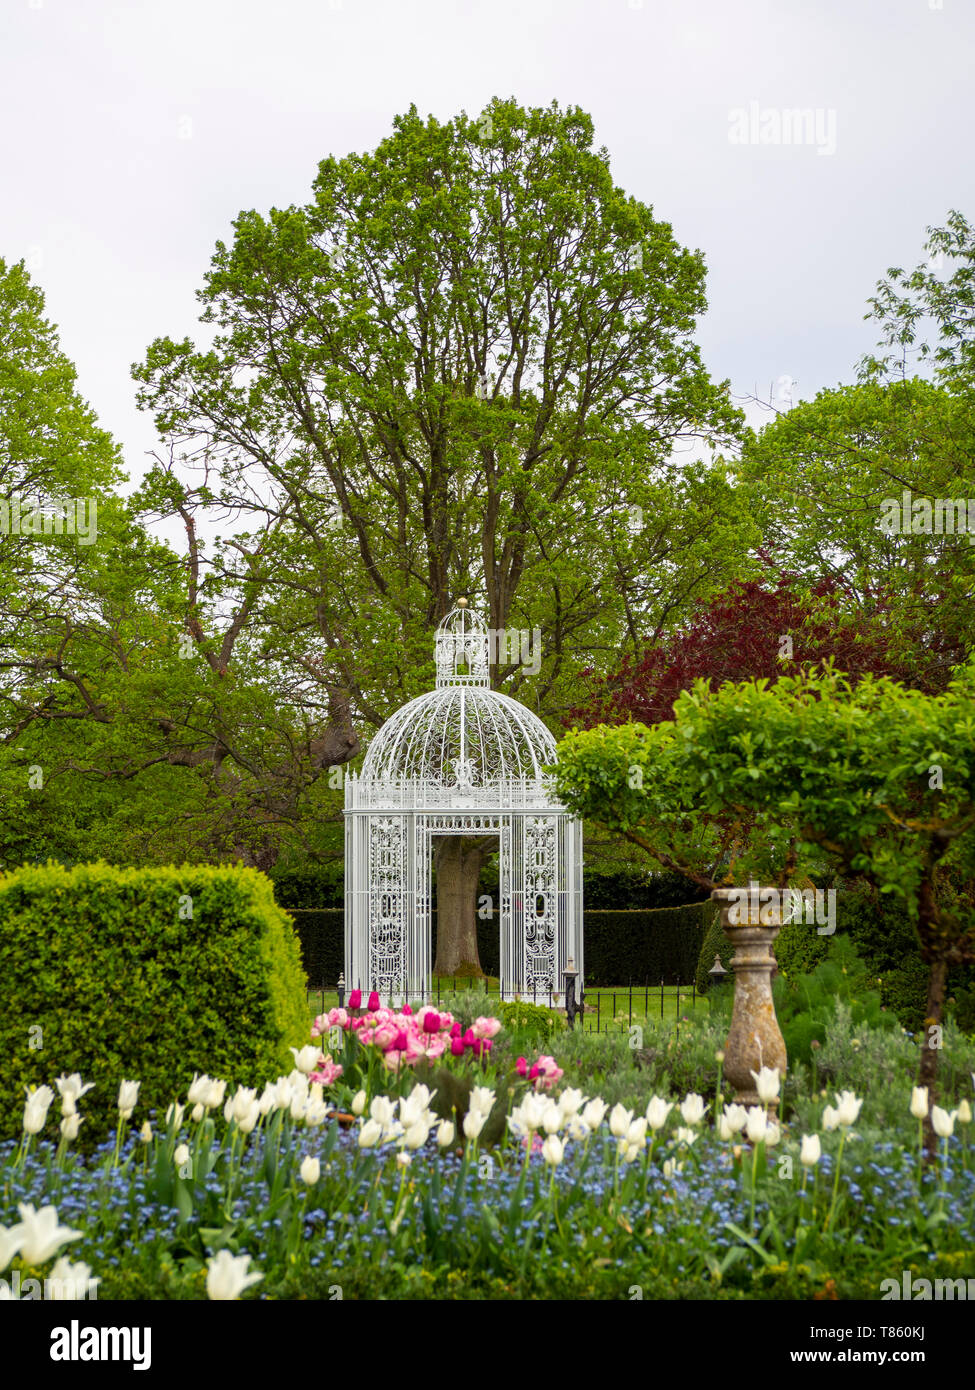 White Pagoda in the Parterre at Chenies Manor Gardens in early May with White tuilp Triumphator, topiary trees, sundial and pink tulips in portrait. Stock Photo